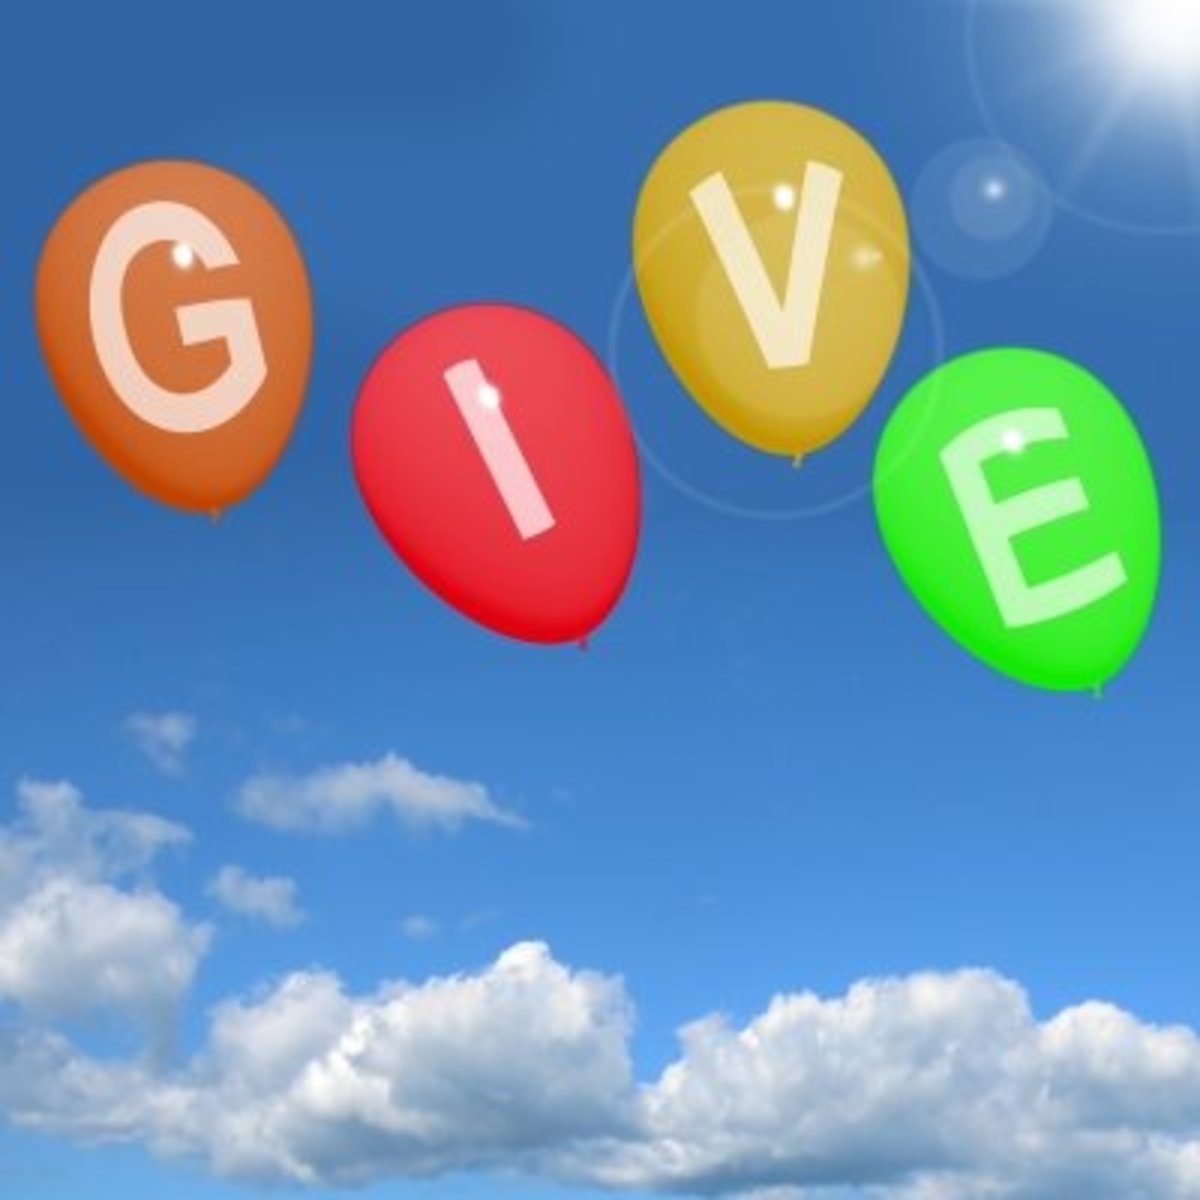 Sometimes giving means receiving